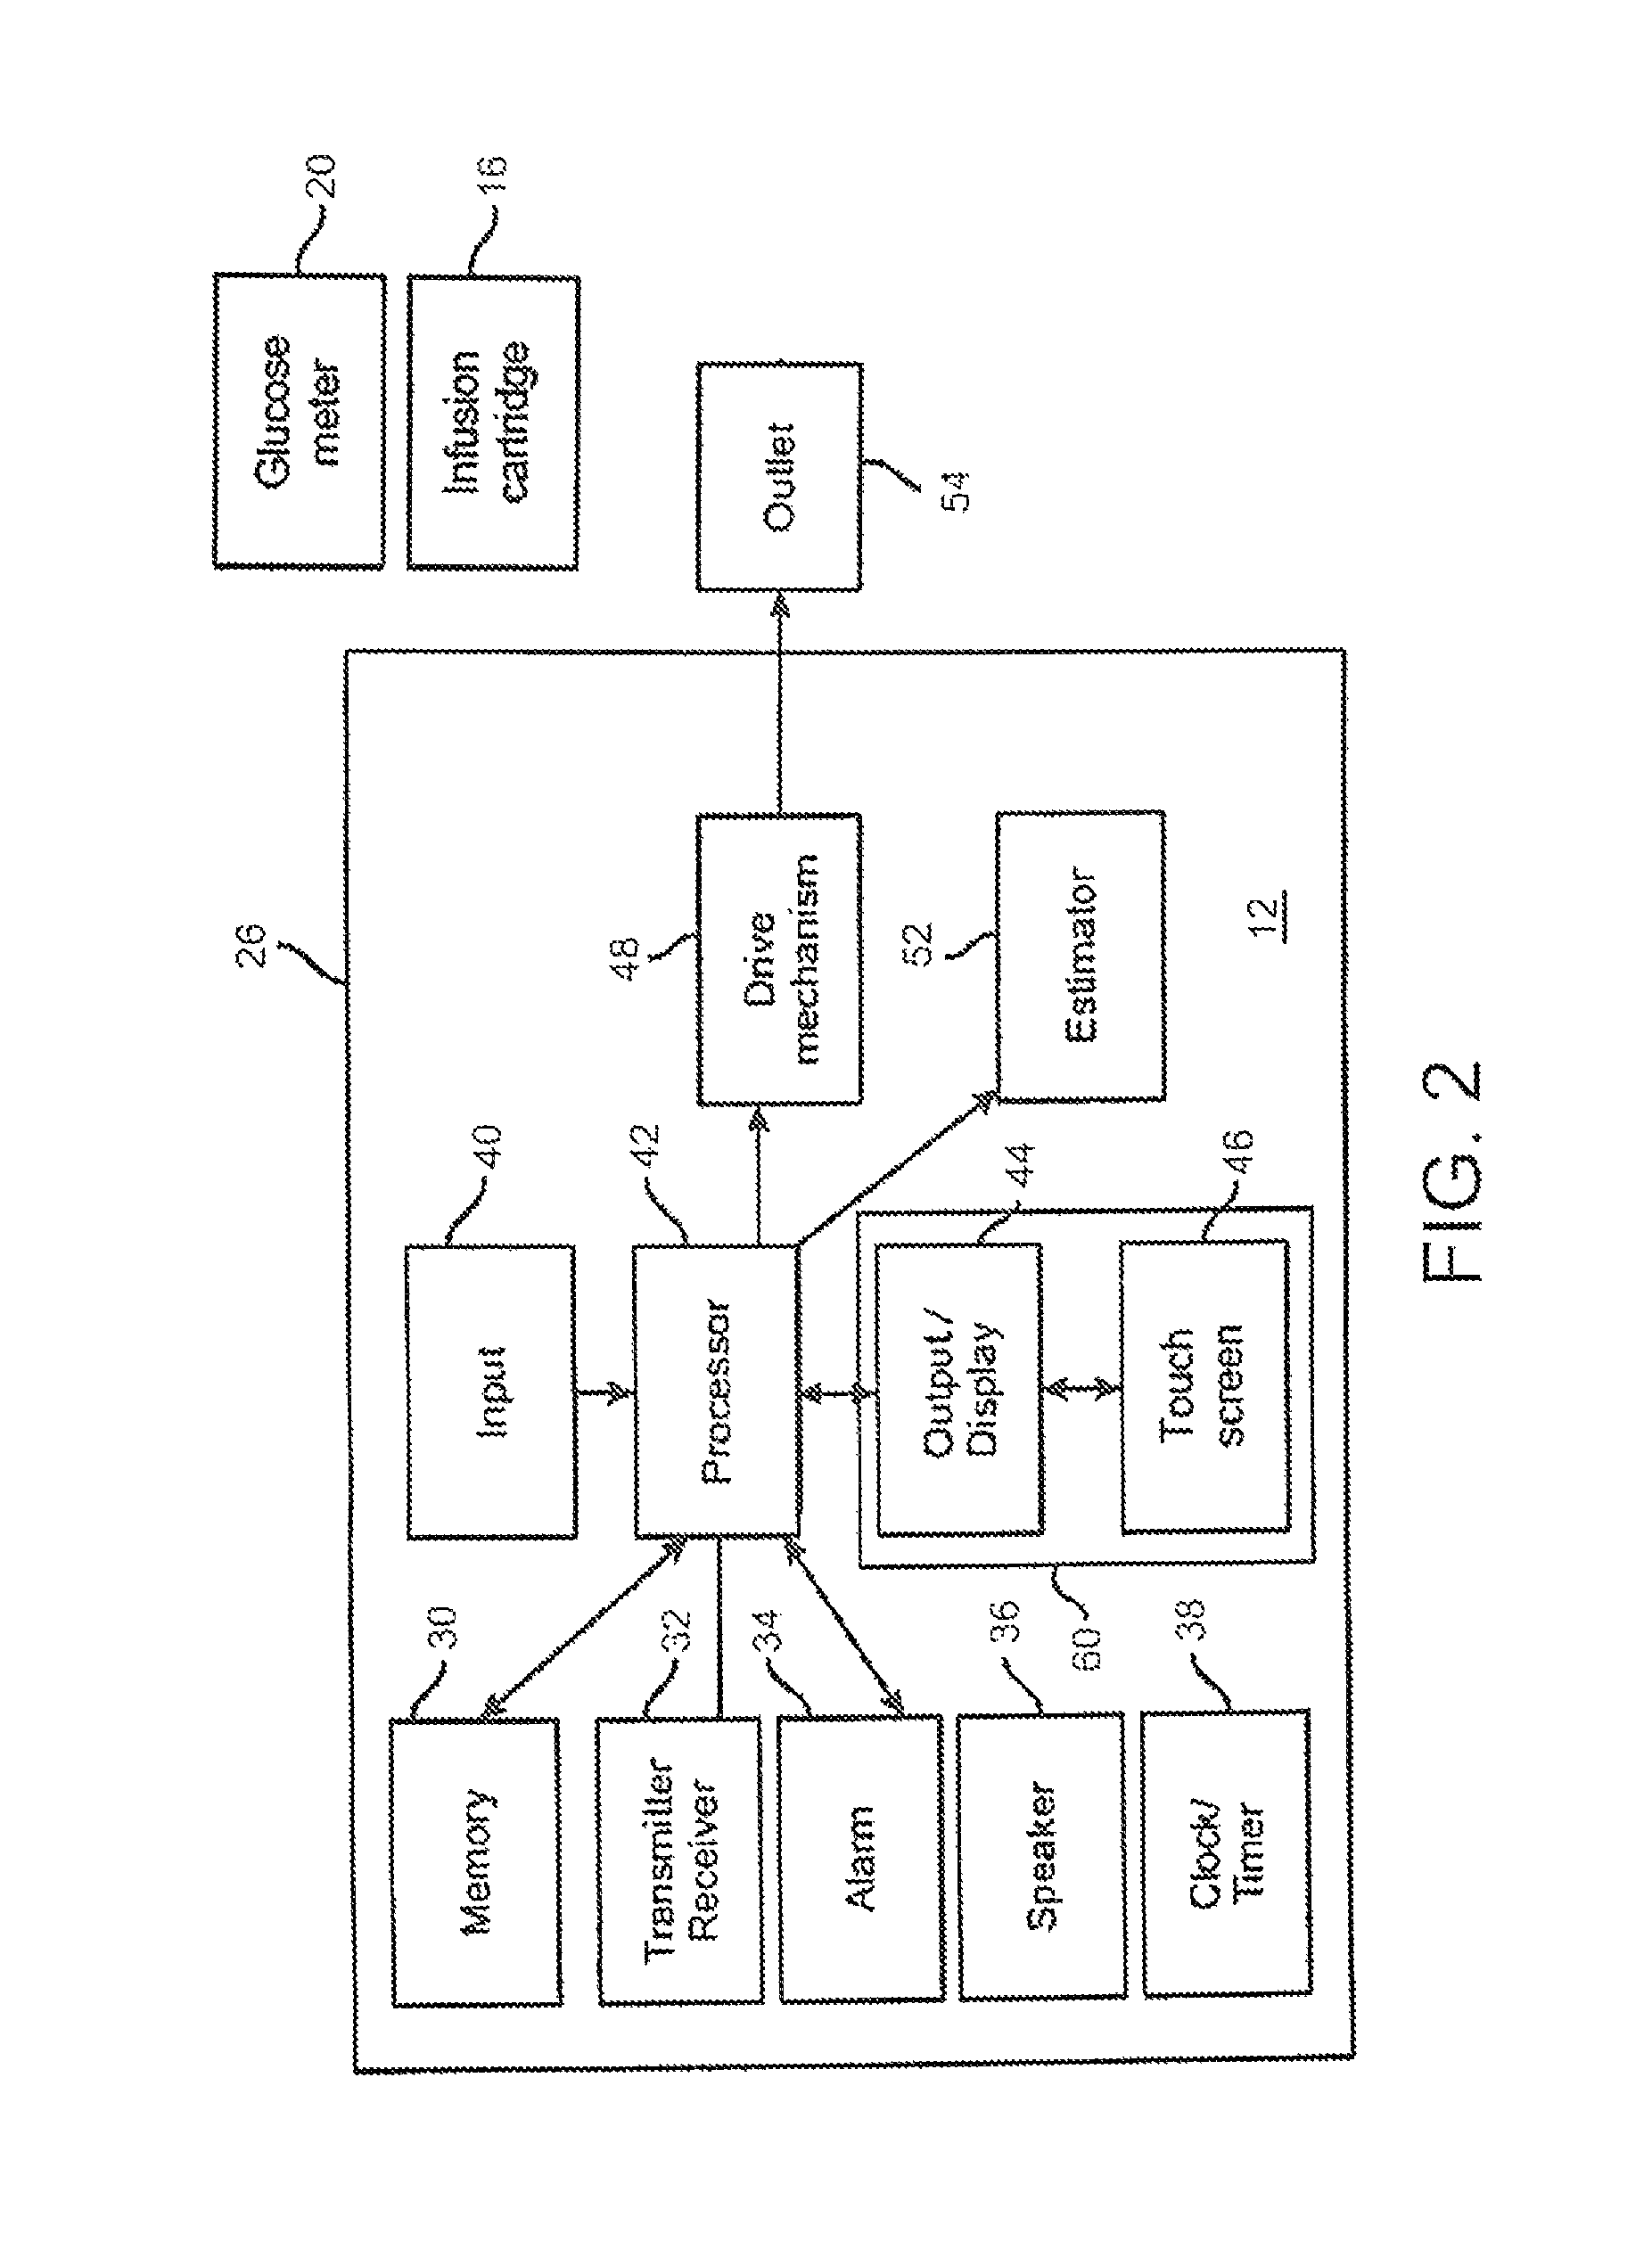 Safety processor for wireless control of a drug delivery device